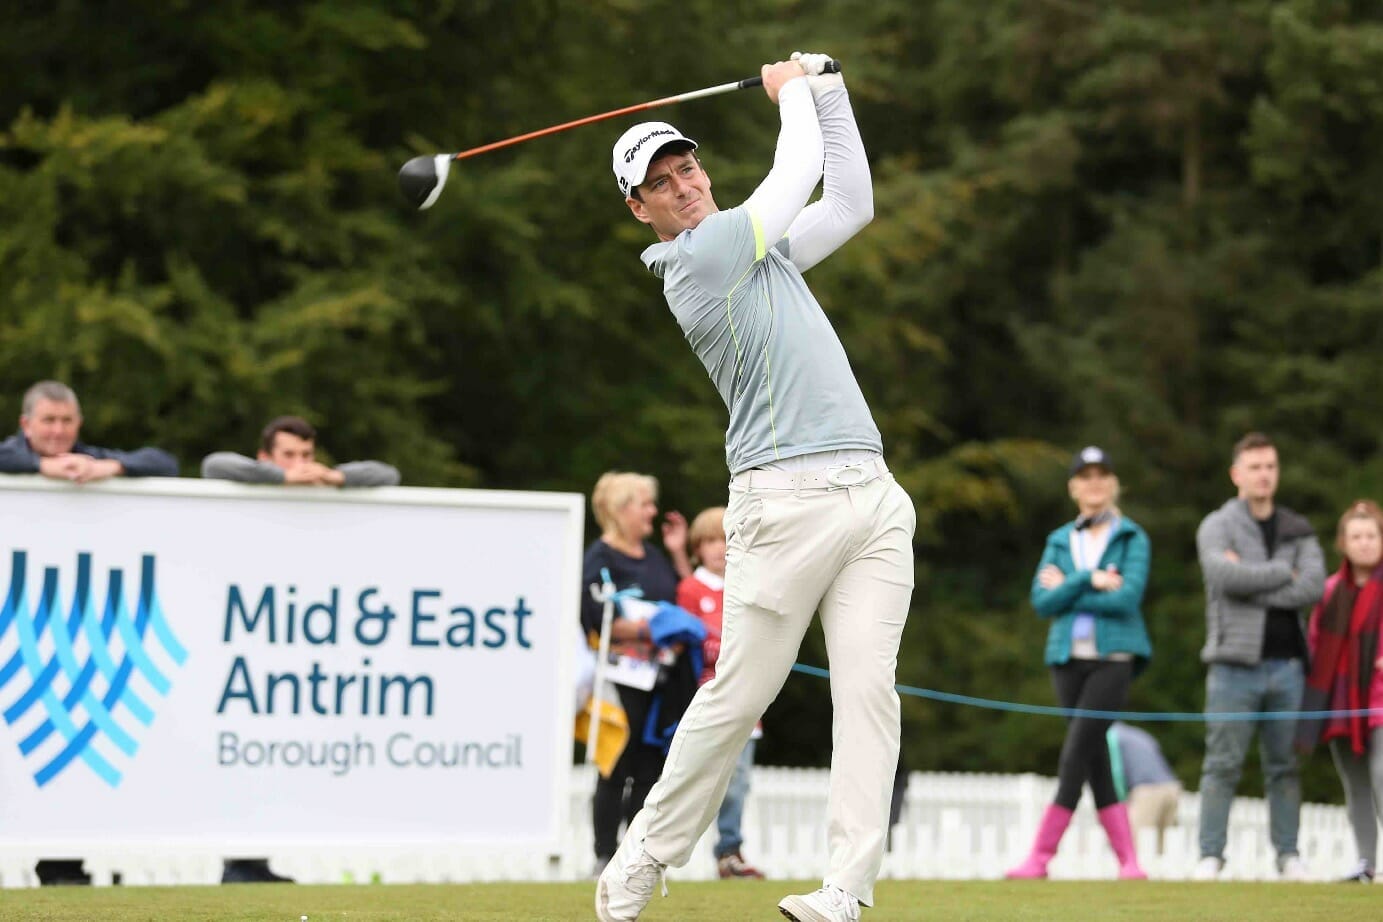 NI Amateur Open winner to receive place at NI Open